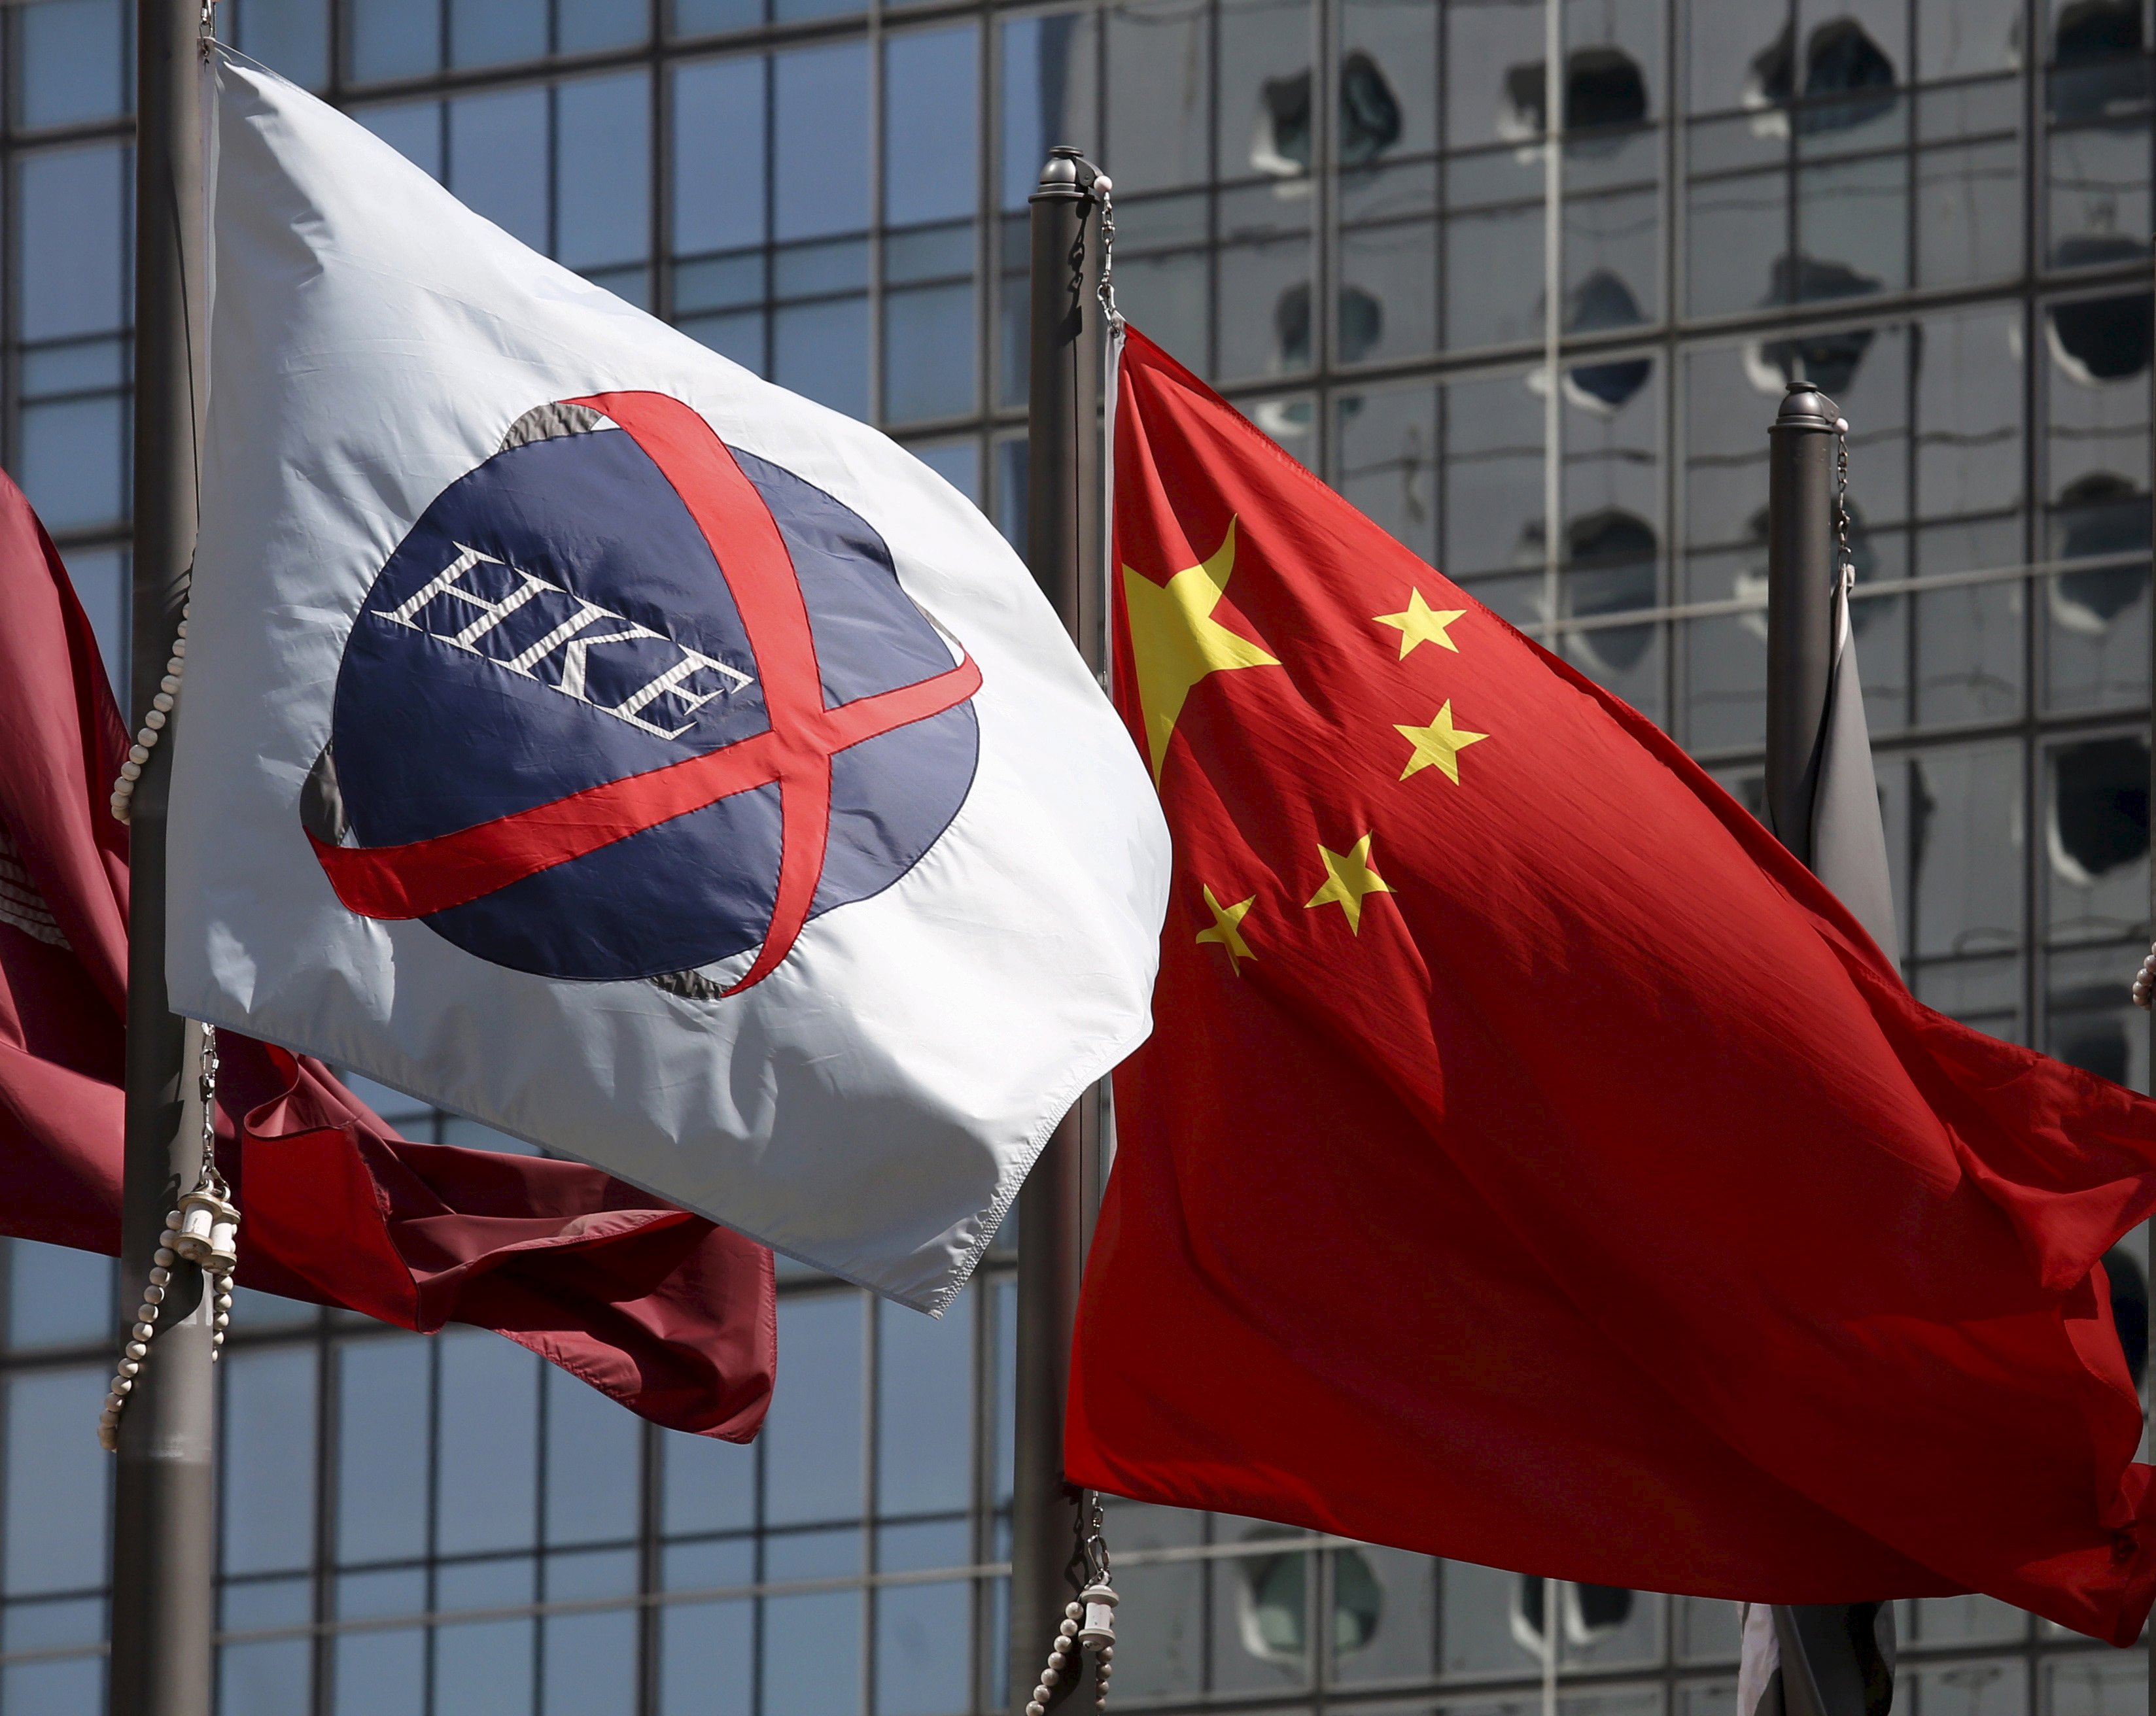 A Chinese national flag (R) flies beside a flag of the Hong Kong Exchanges (HKEx) in Hong Kong in this April 15, 2015 file photo. Following Chinas stock markets heavy fall in July, hundreds of companies and executives that answered the call from Beijing to do their patriotic duty and signal confidence by buying back their own stock, which regulators hoped would entice other investors back to trade are facing substantial losses as markets slid further. According to a Reuters analysis, firms that announced buybacks have seen their shares lose an average of roughly 40 percent in the last three months. REUTERS/Bobby Yip/Files